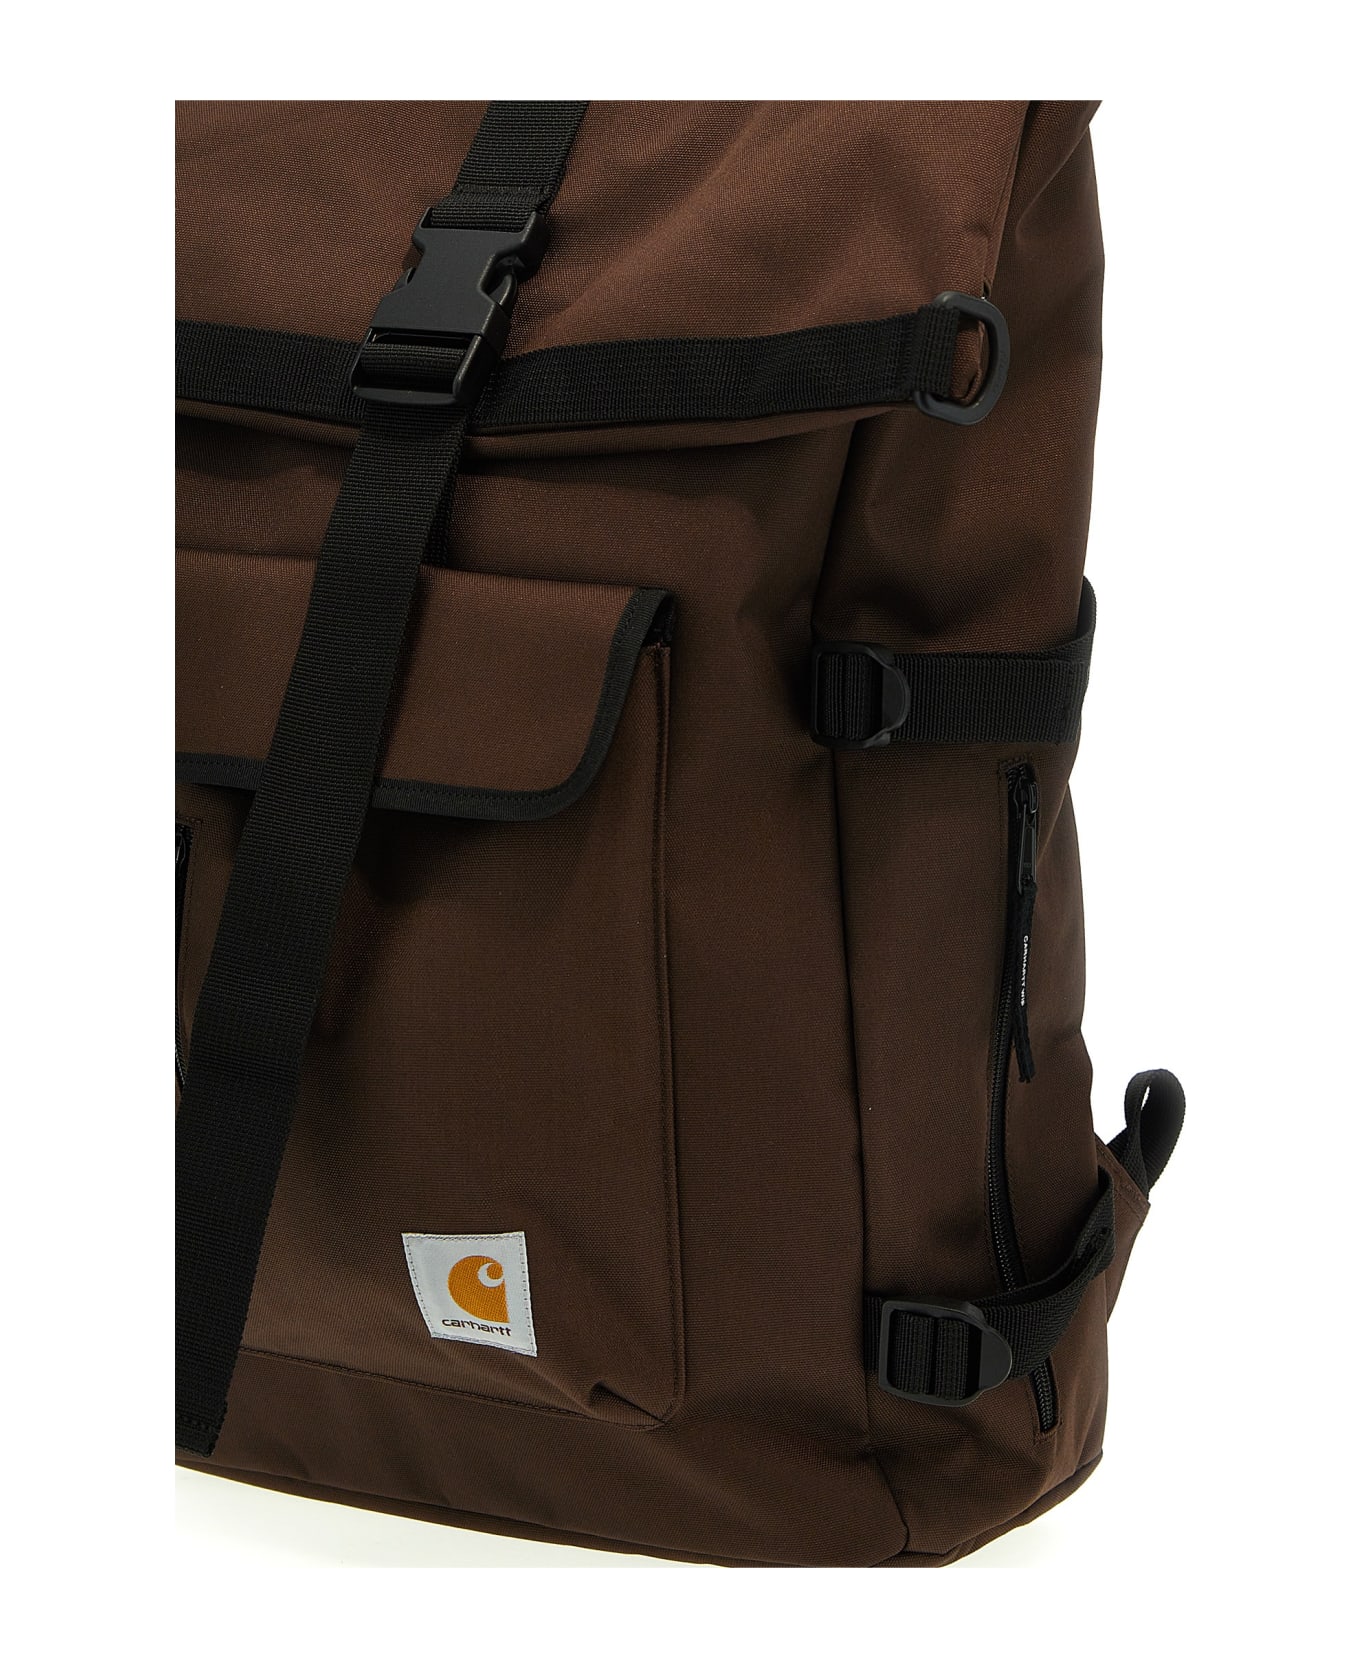 Carhartt 'philis' Backpack - Brown バックパック